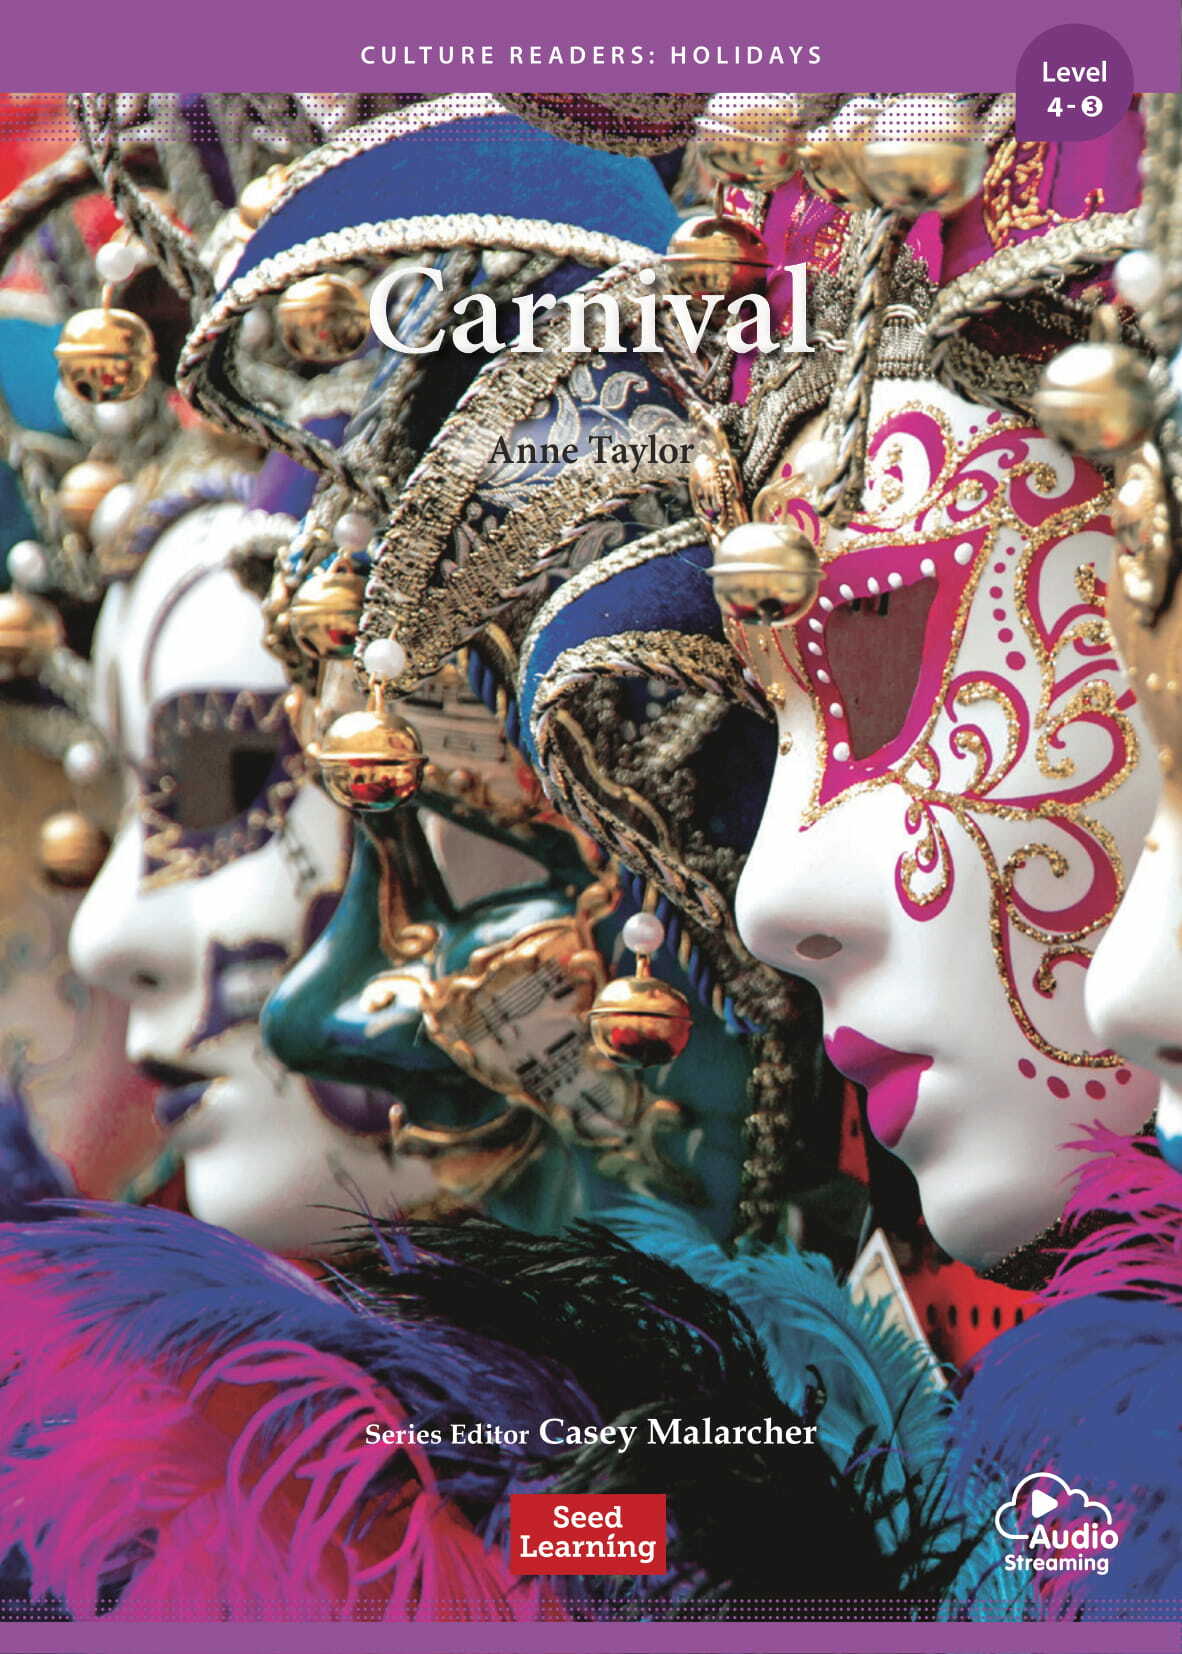 Culture Readers Holidays Level 4 : Carnival (Story Book + Audio APP)